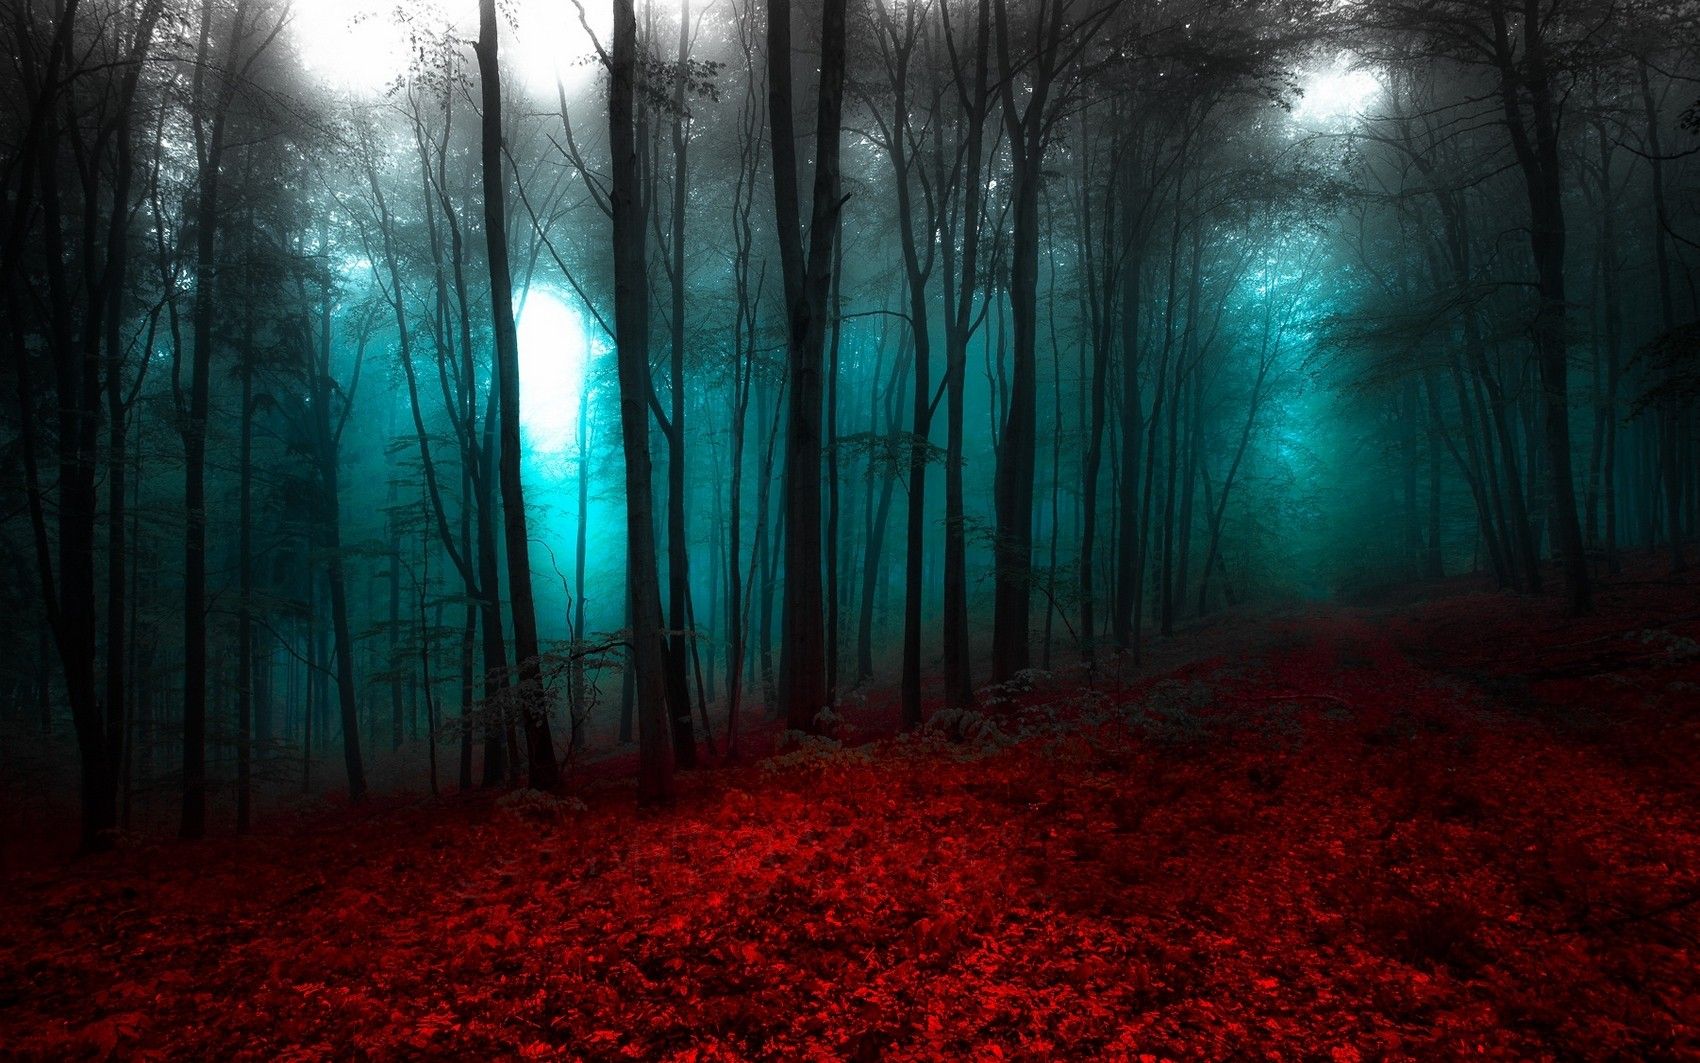 #nature, #mist, #forest, #landscape, #path, #red, #trees